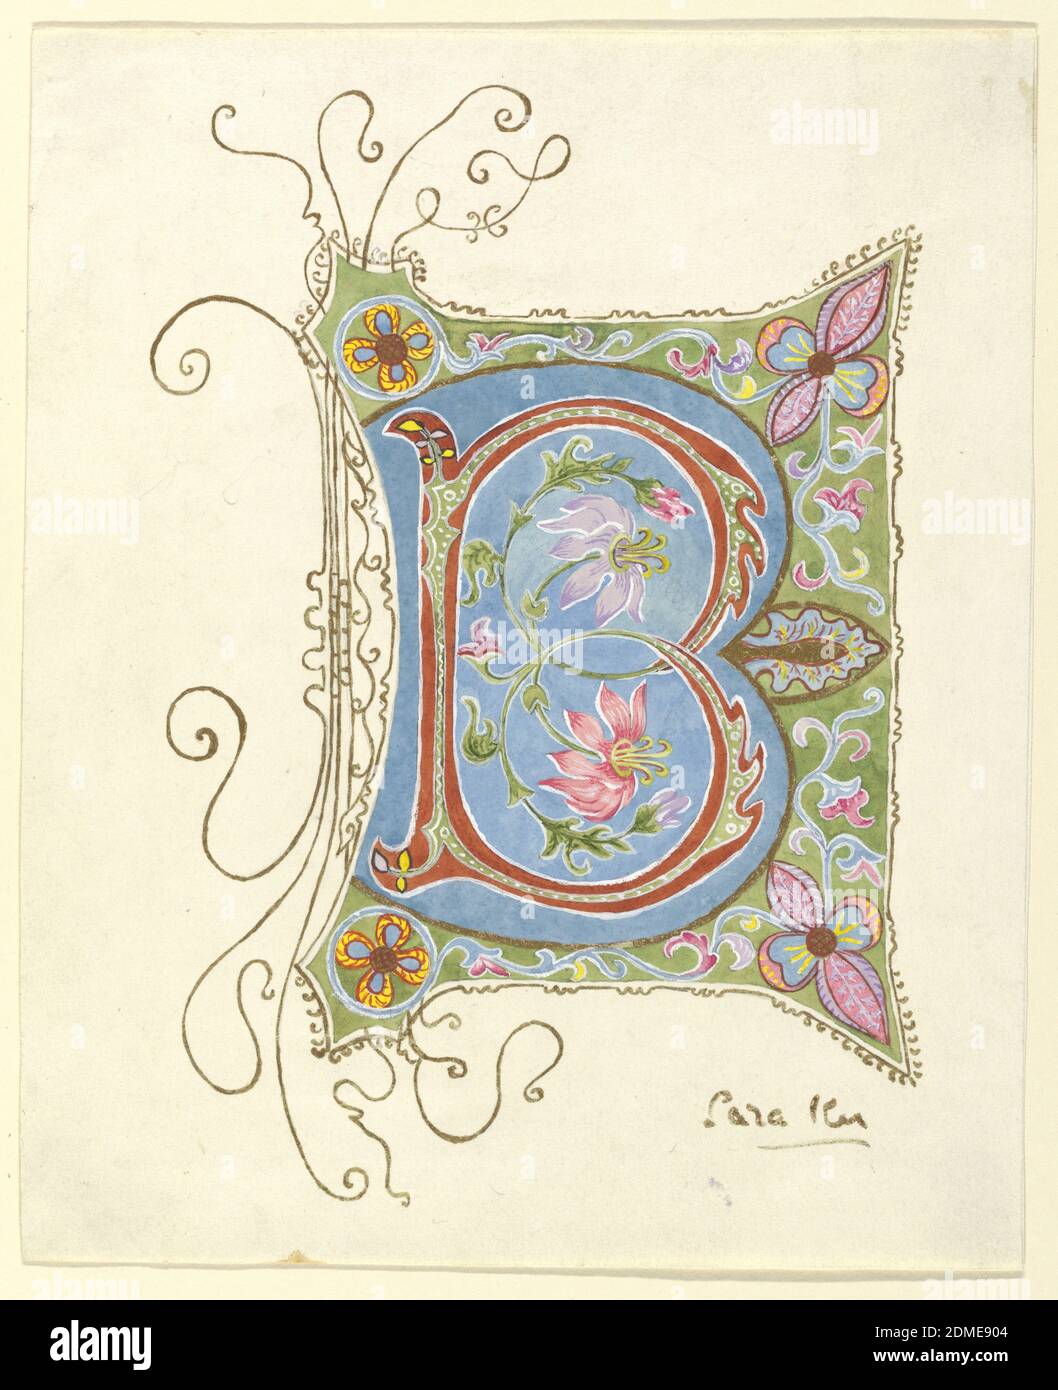 Illuminated Initial, Sara Ker, Water color, gold, on paper, Design for the initial 'B'., USA, ca. 1893, graphic design, Drawing Stock Photo